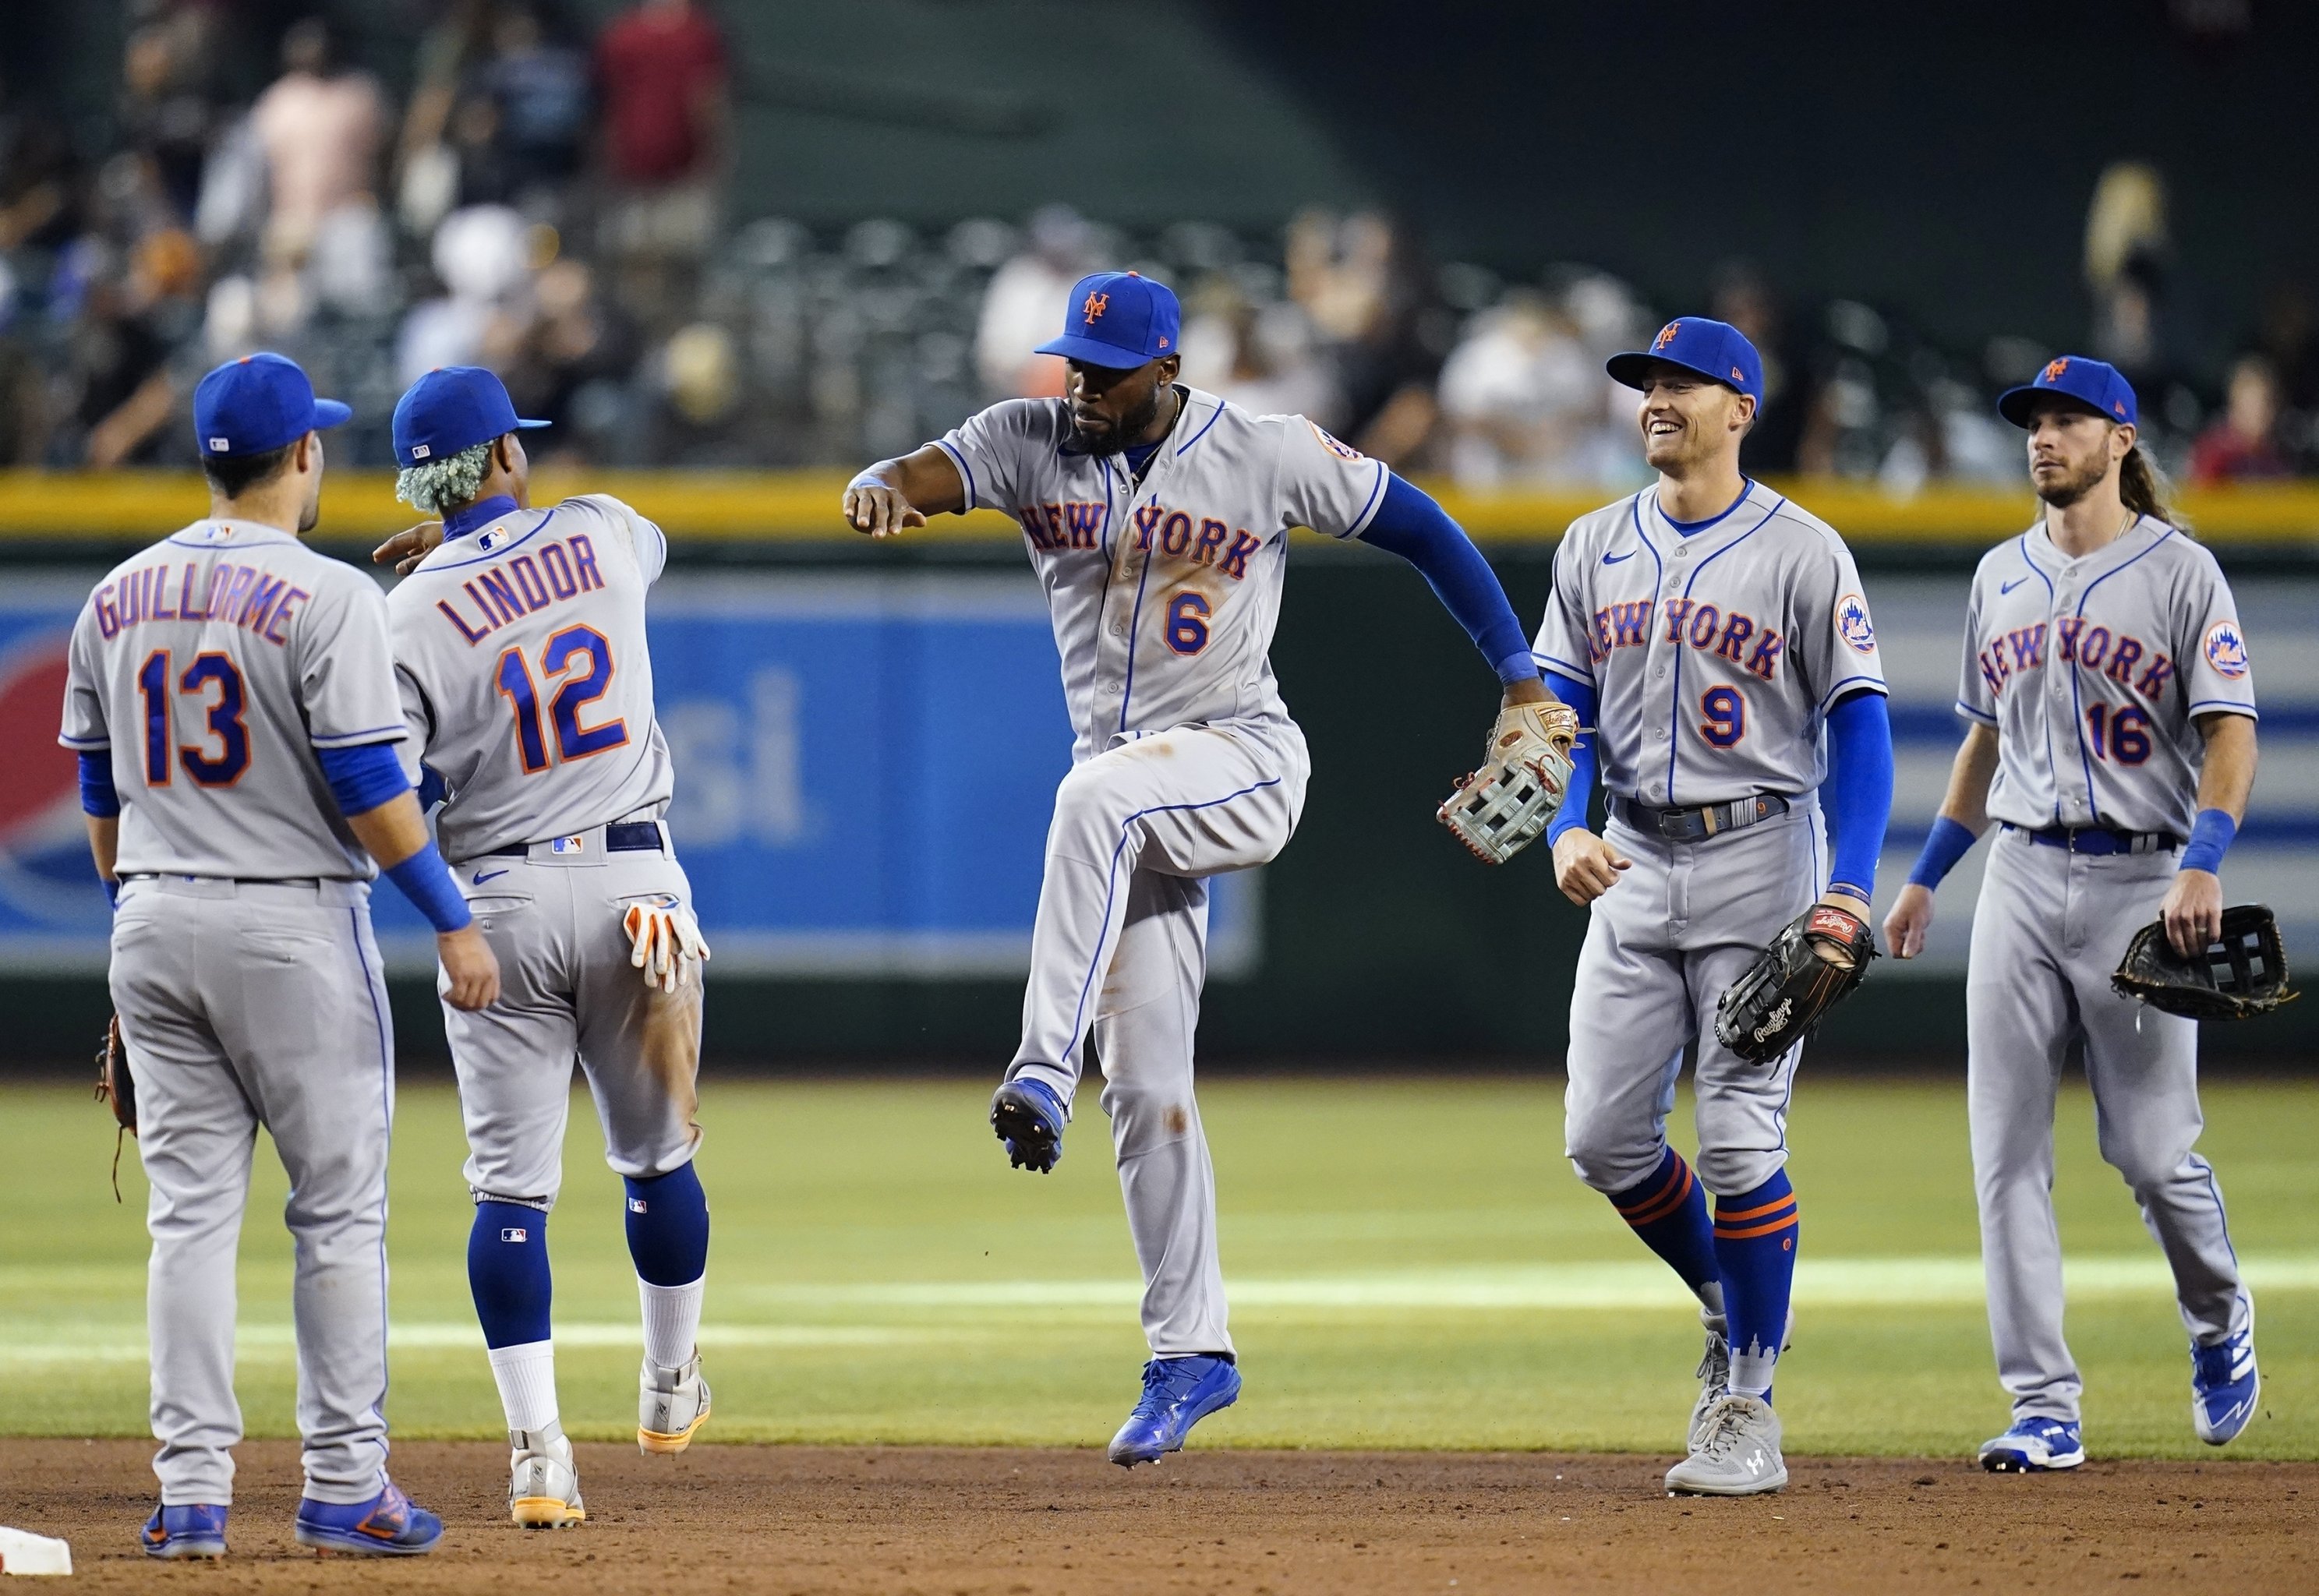 Baez hits 2 HRs as Cubs open season with 12-4 win at Rangers